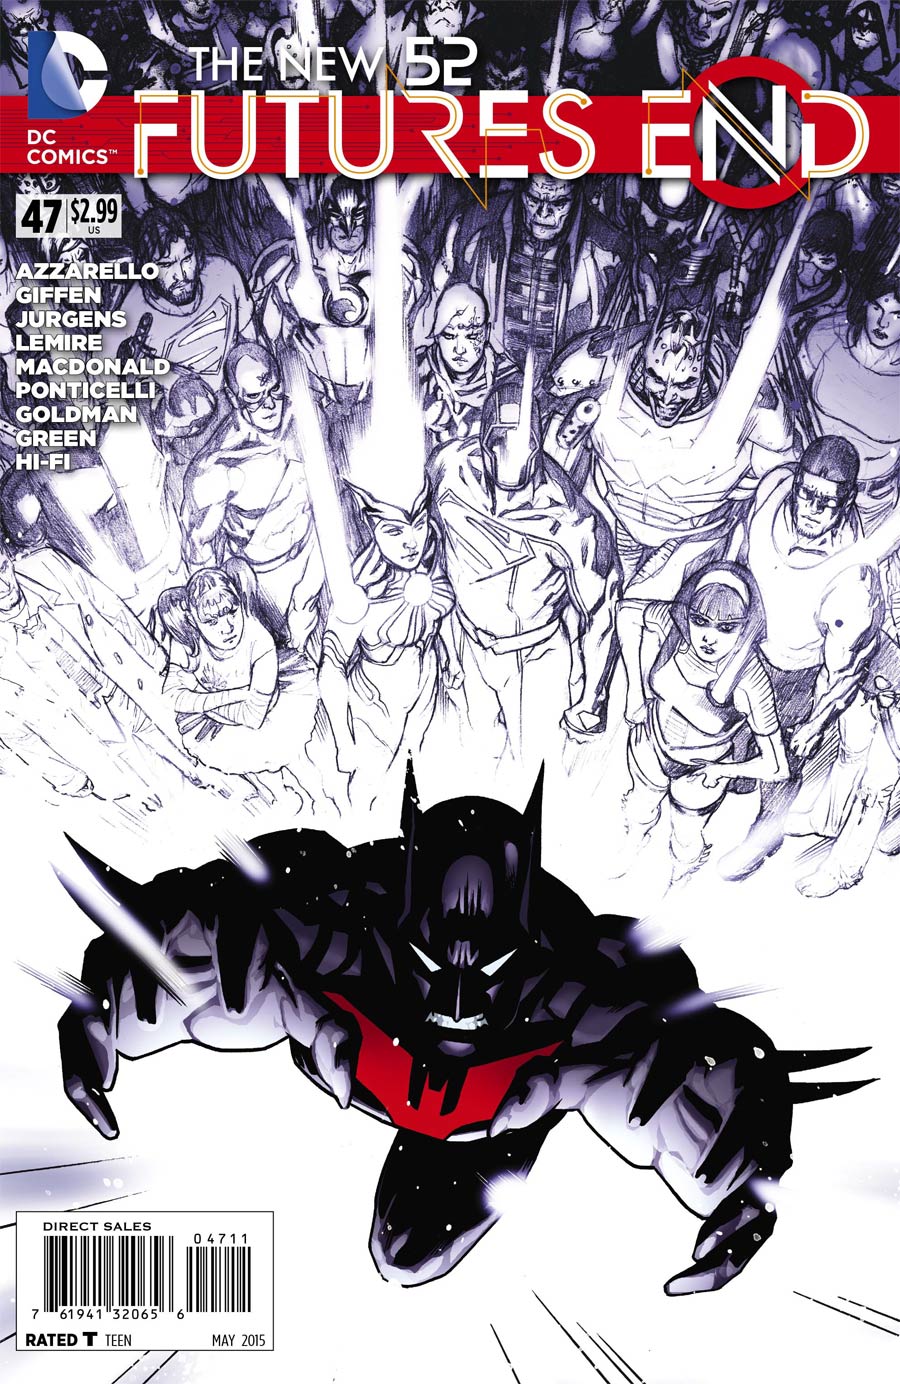 New 52 Futures End #47